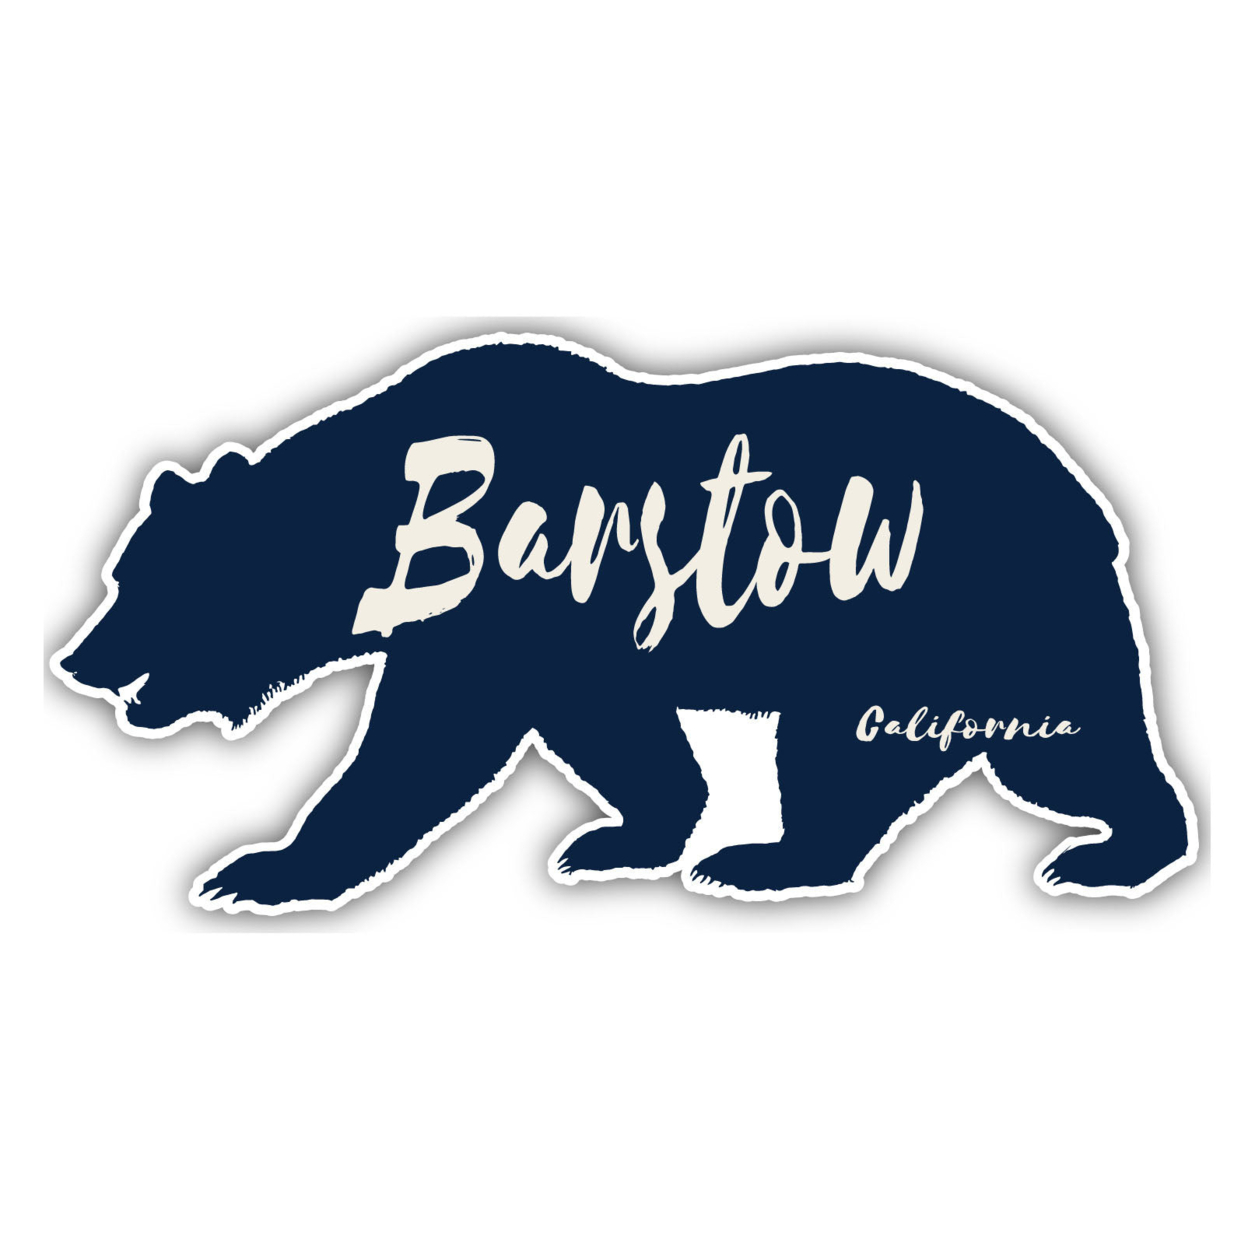 Barstow California Souvenir Decorative Stickers (Choose Theme And Size) - 4-Pack, 10-Inch, Bear